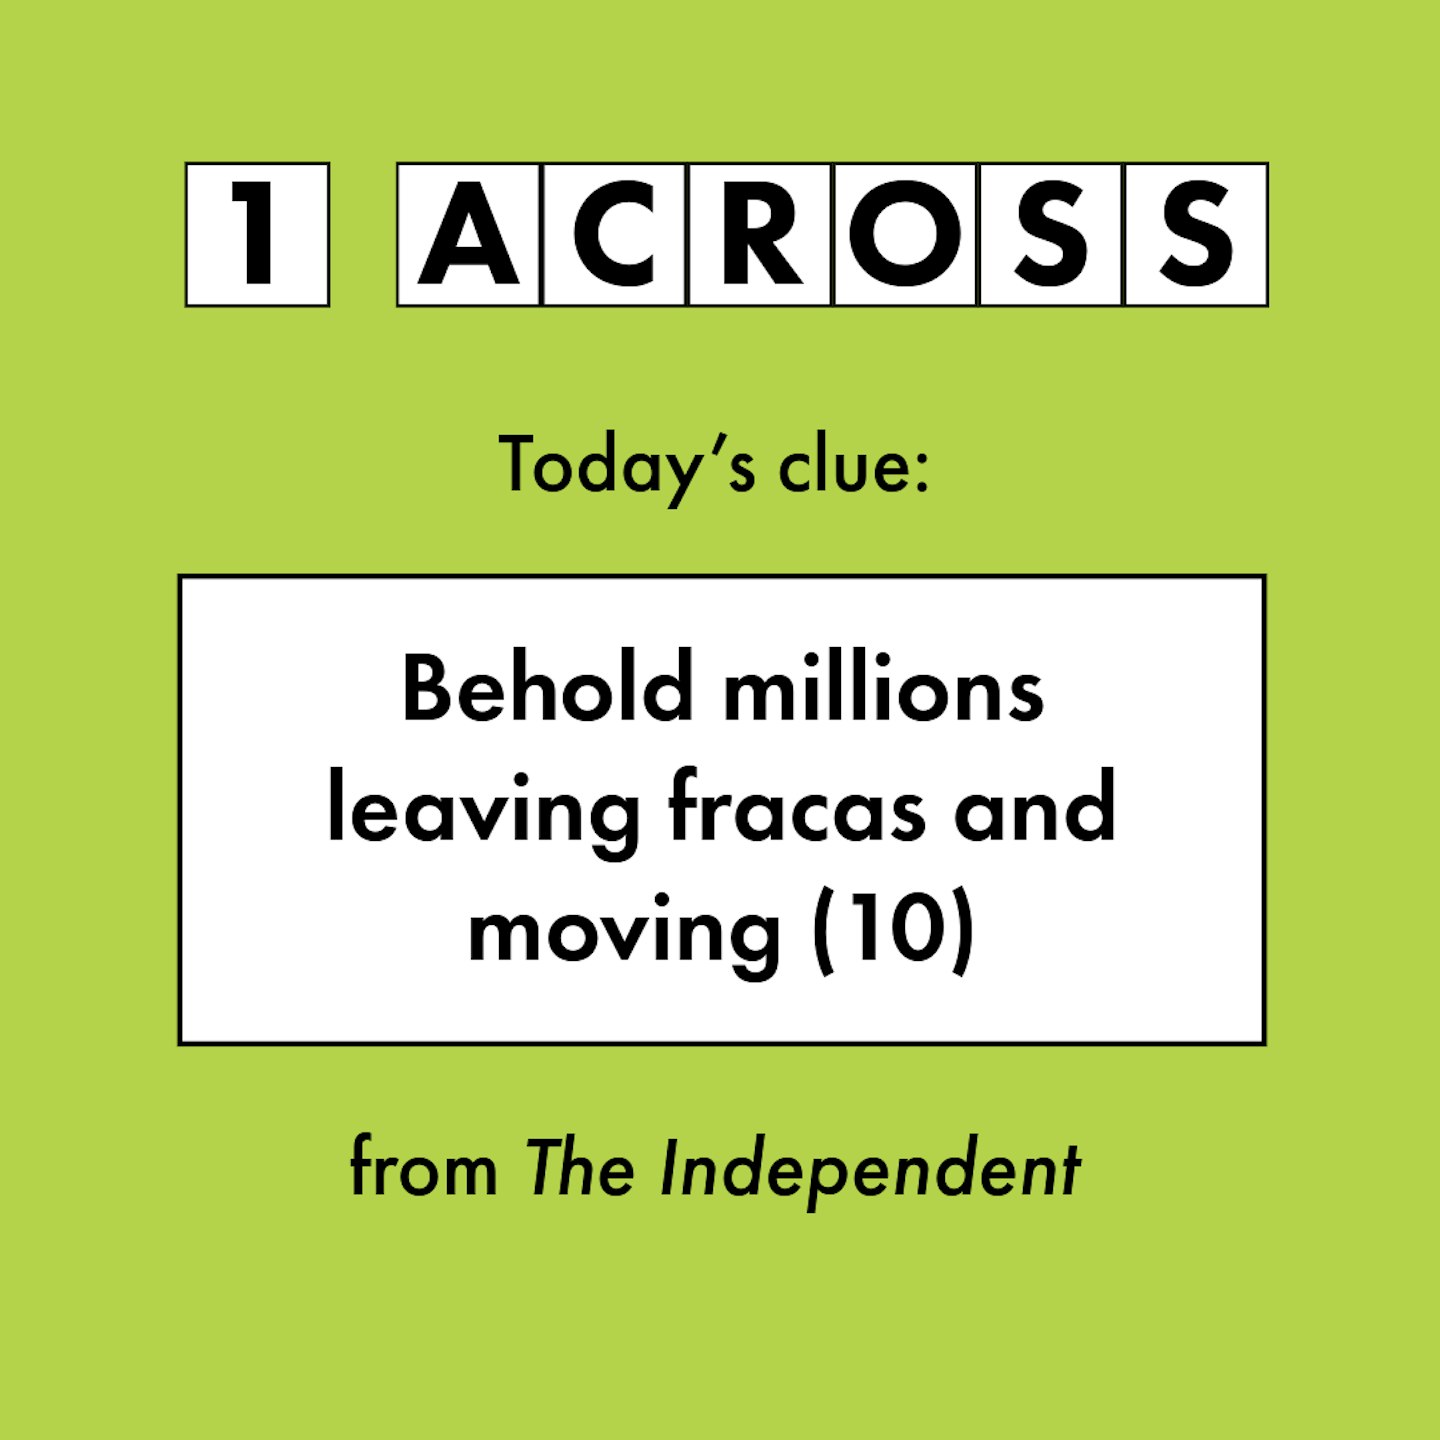 1 Across: a cryptic crossword clue breakdown Behold millions leaving